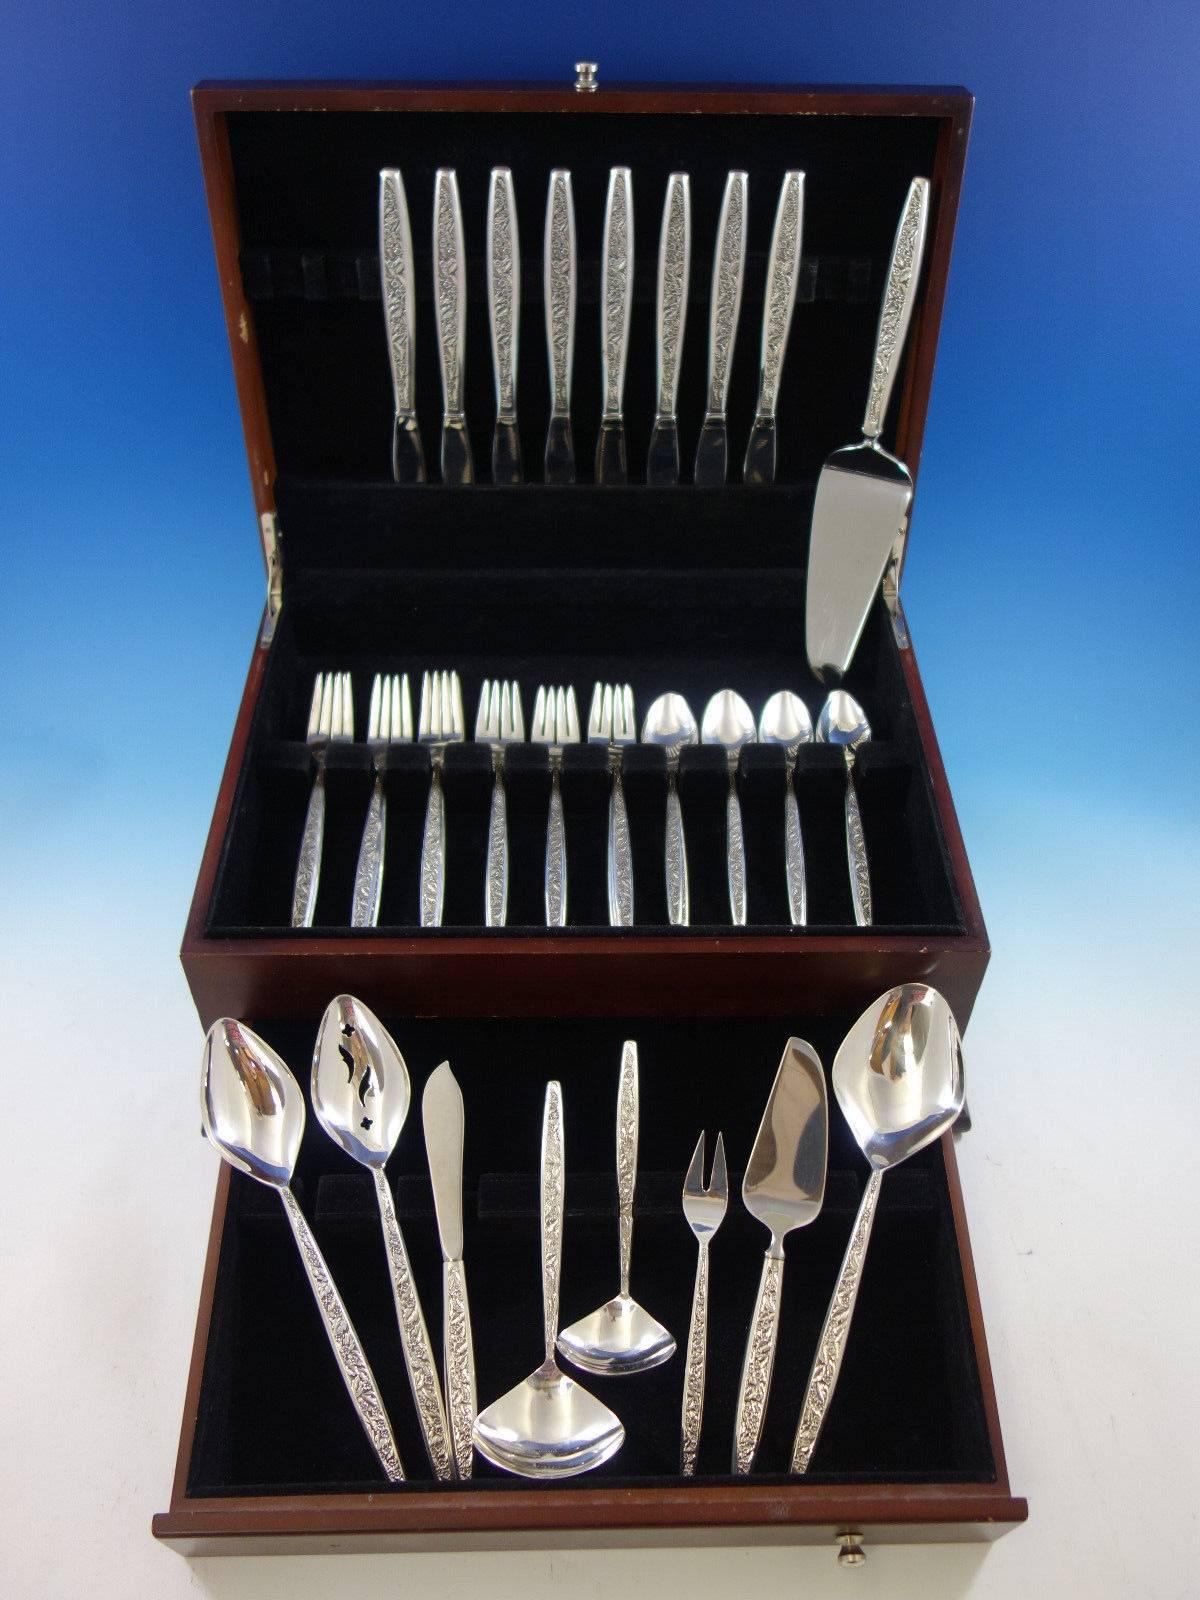 Valencia by International Sterling silver flatware set - 41 pieces. This set includes: 

eight knives, 9